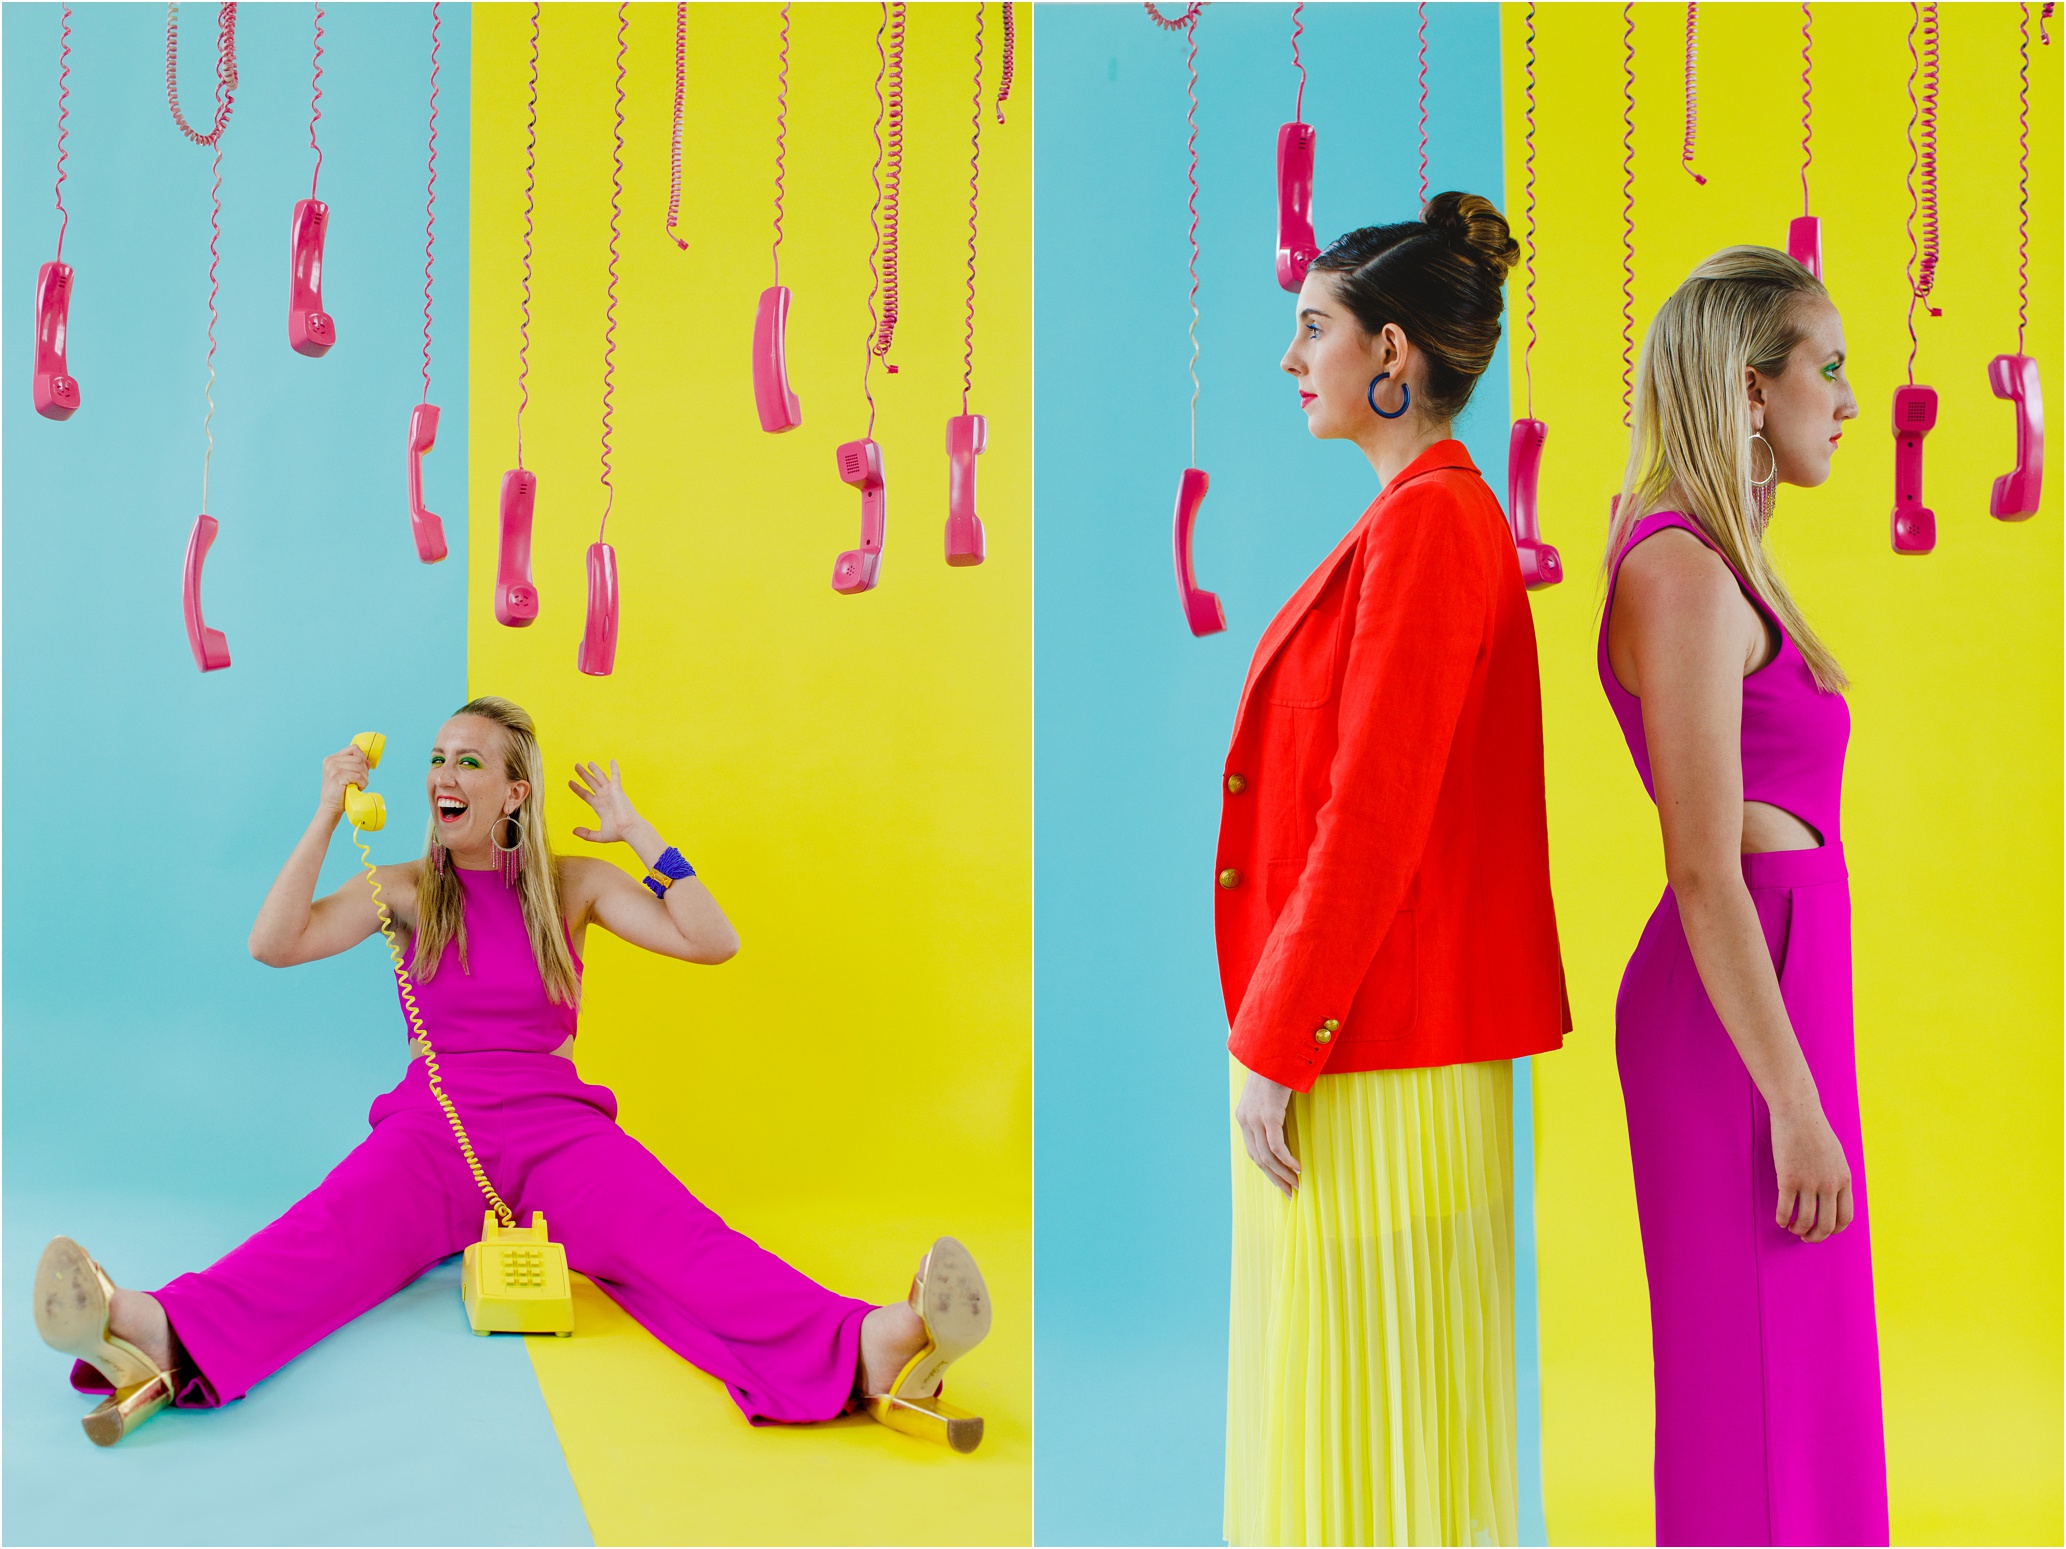 pop art, vibrant editorial style, telephones, bright colors, fashion photography